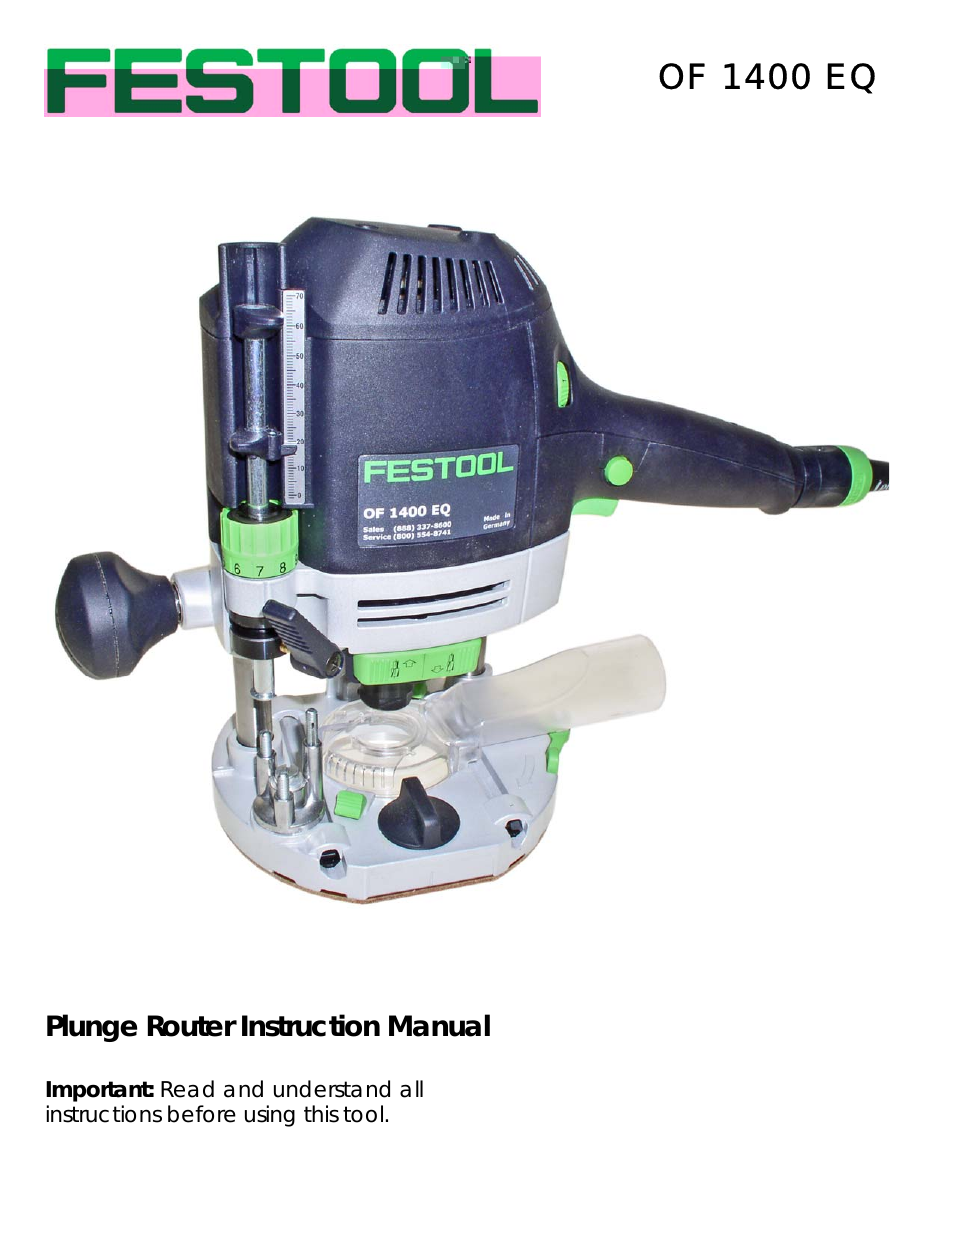 Plunge Router I